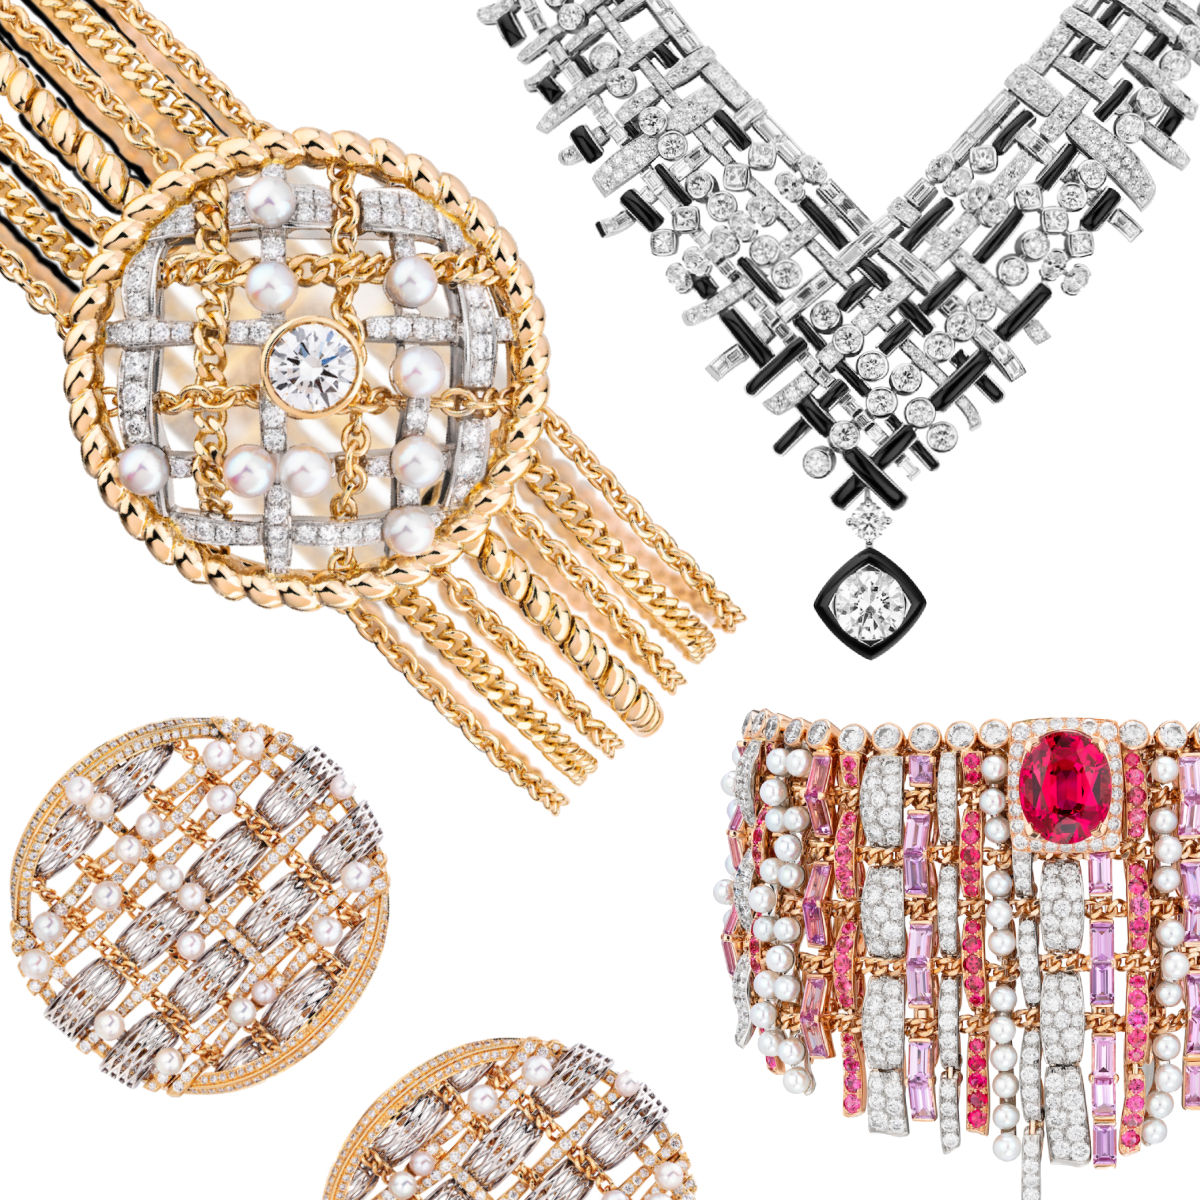 Chanel's latest high jewellery collection is an ode to the iconic